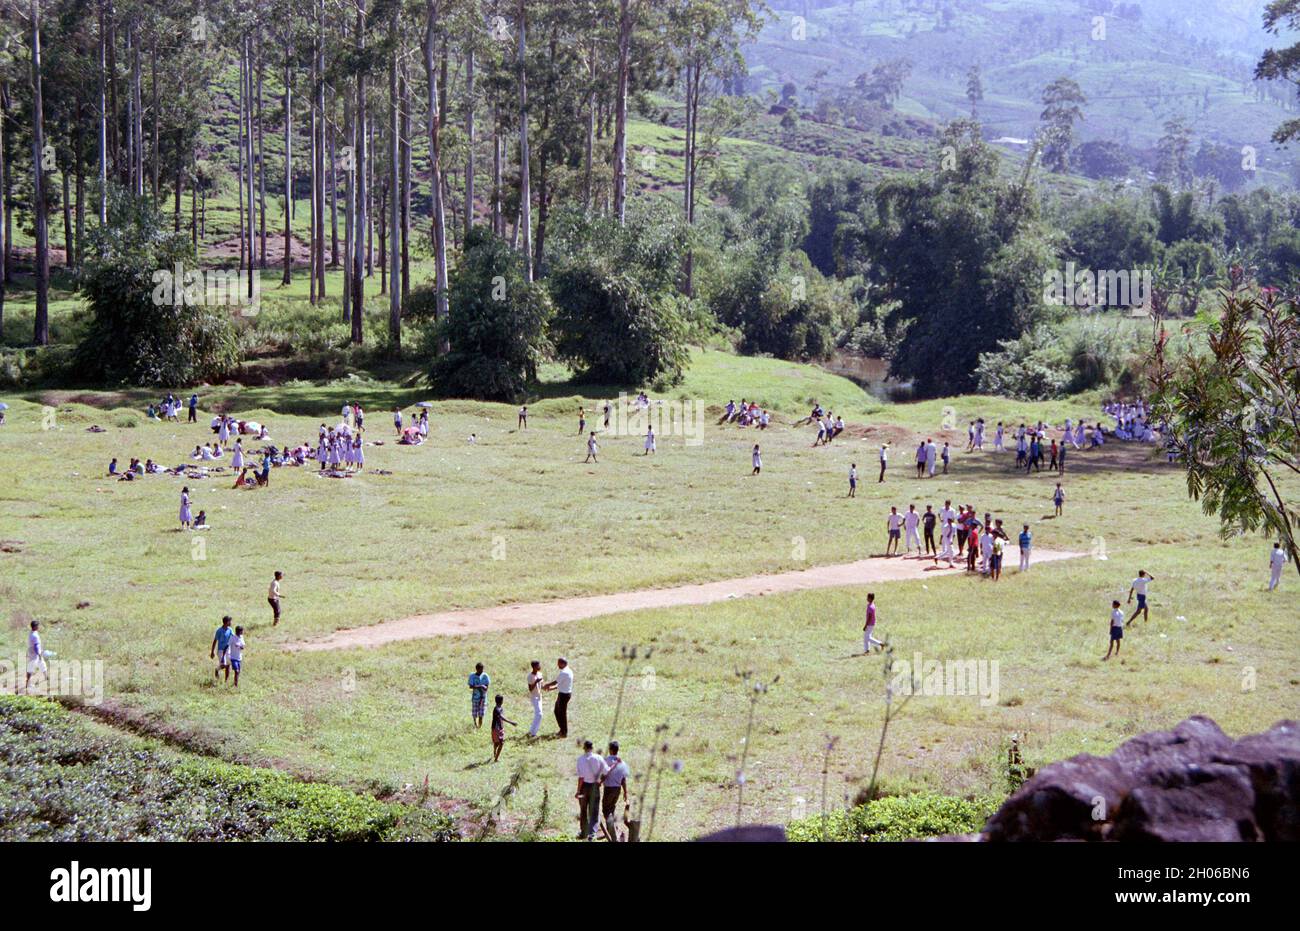 SRI LANKA:  Children enjoying a communal sports event in an open area  on the vast scenic plantations in The Tea Trail on the Norwood Estate Stock Photo